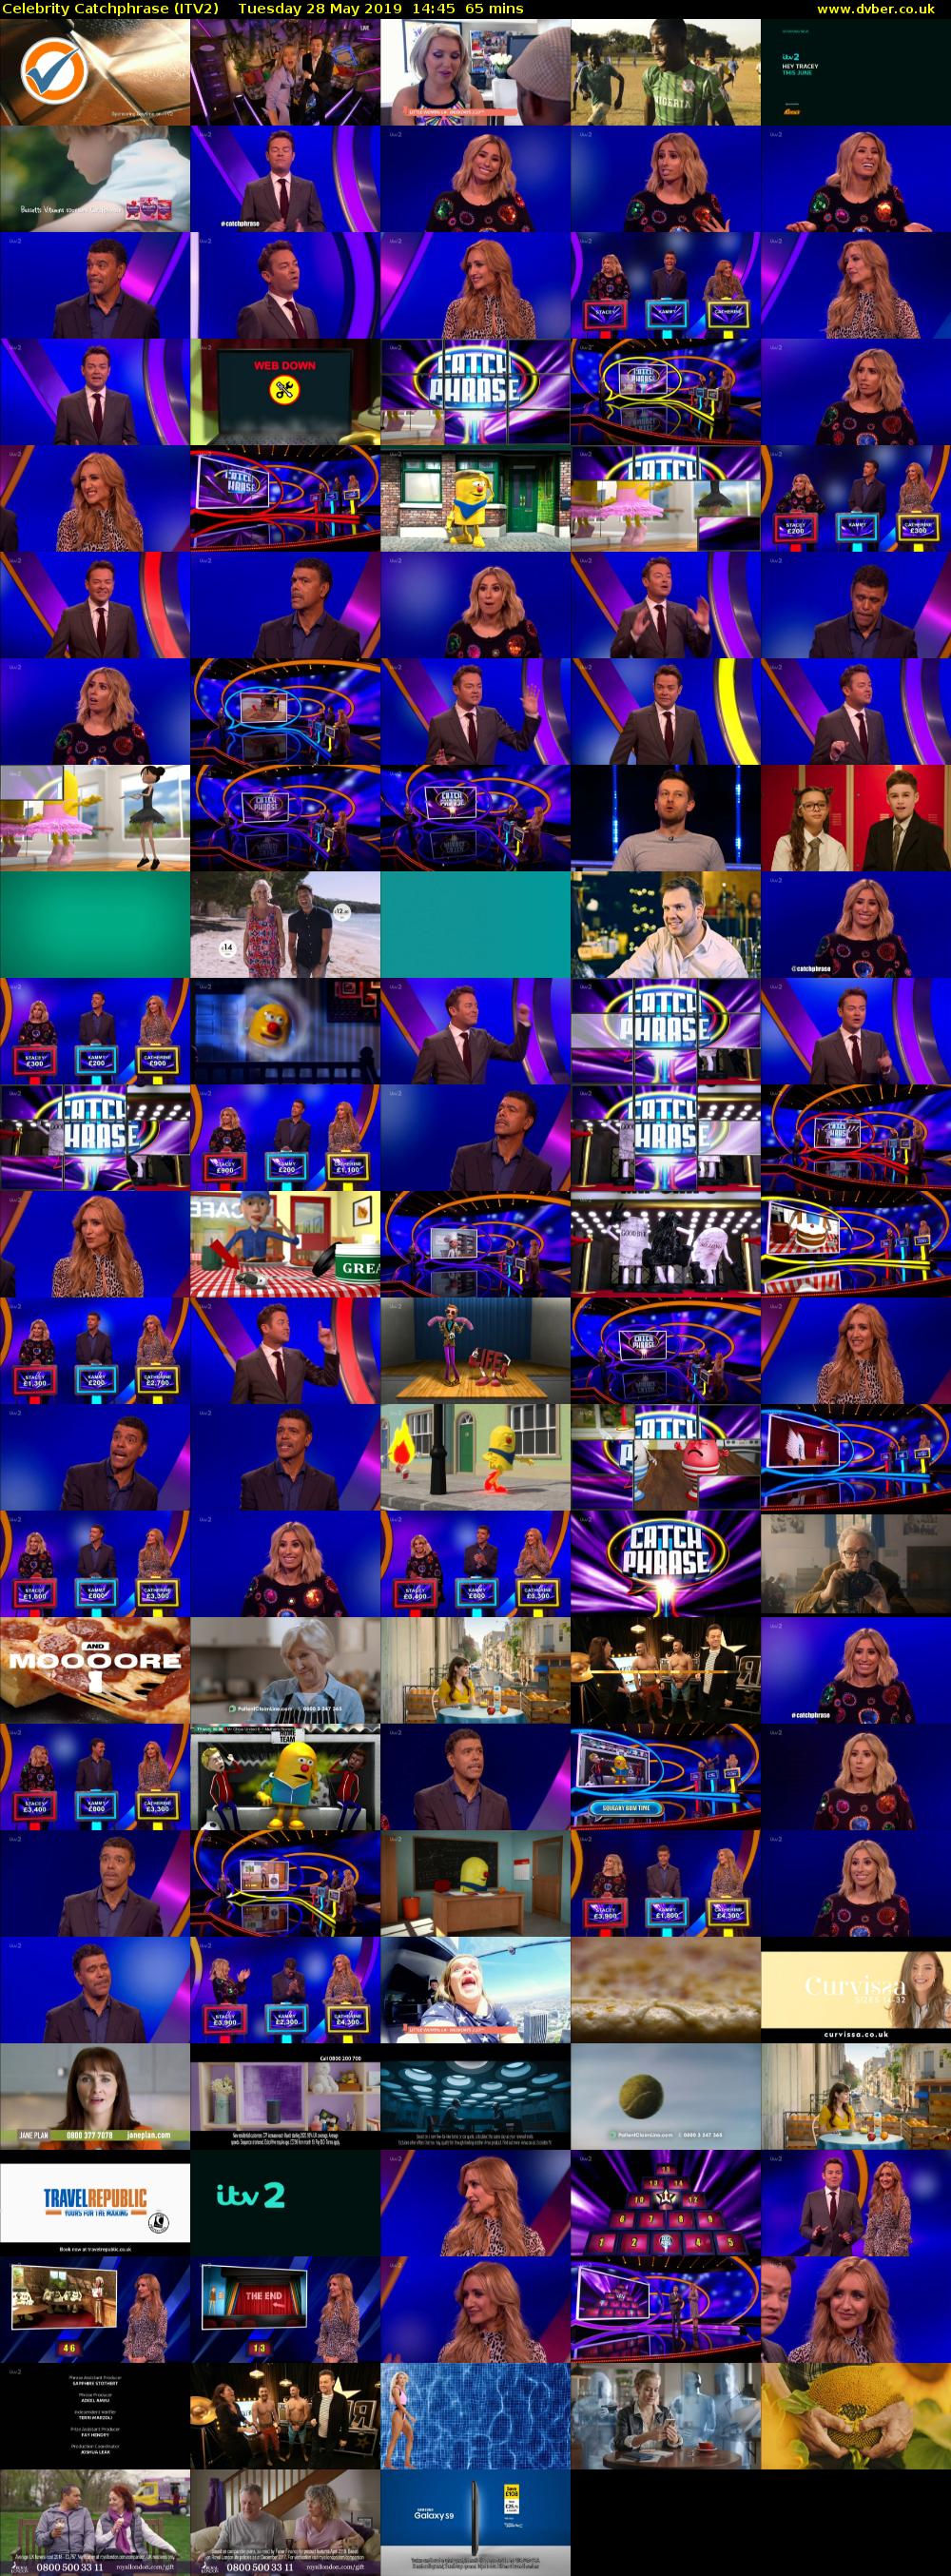 Celebrity Catchphrase (ITV2) Tuesday 28 May 2019 14:45 - 15:50